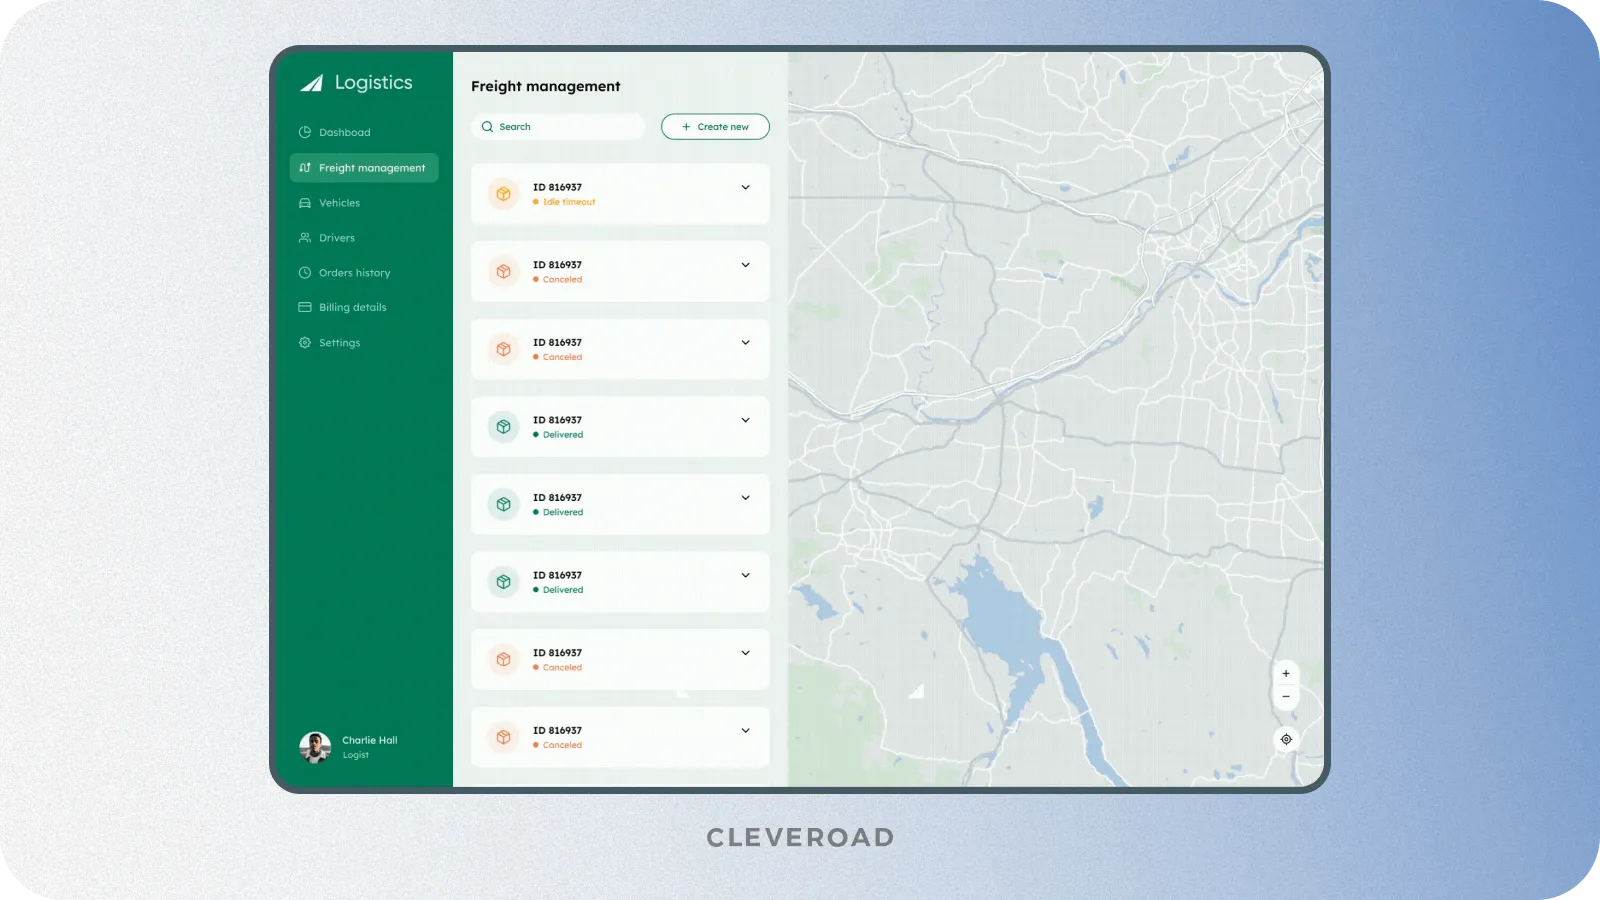 Interface of transportation management system by Cleveroad